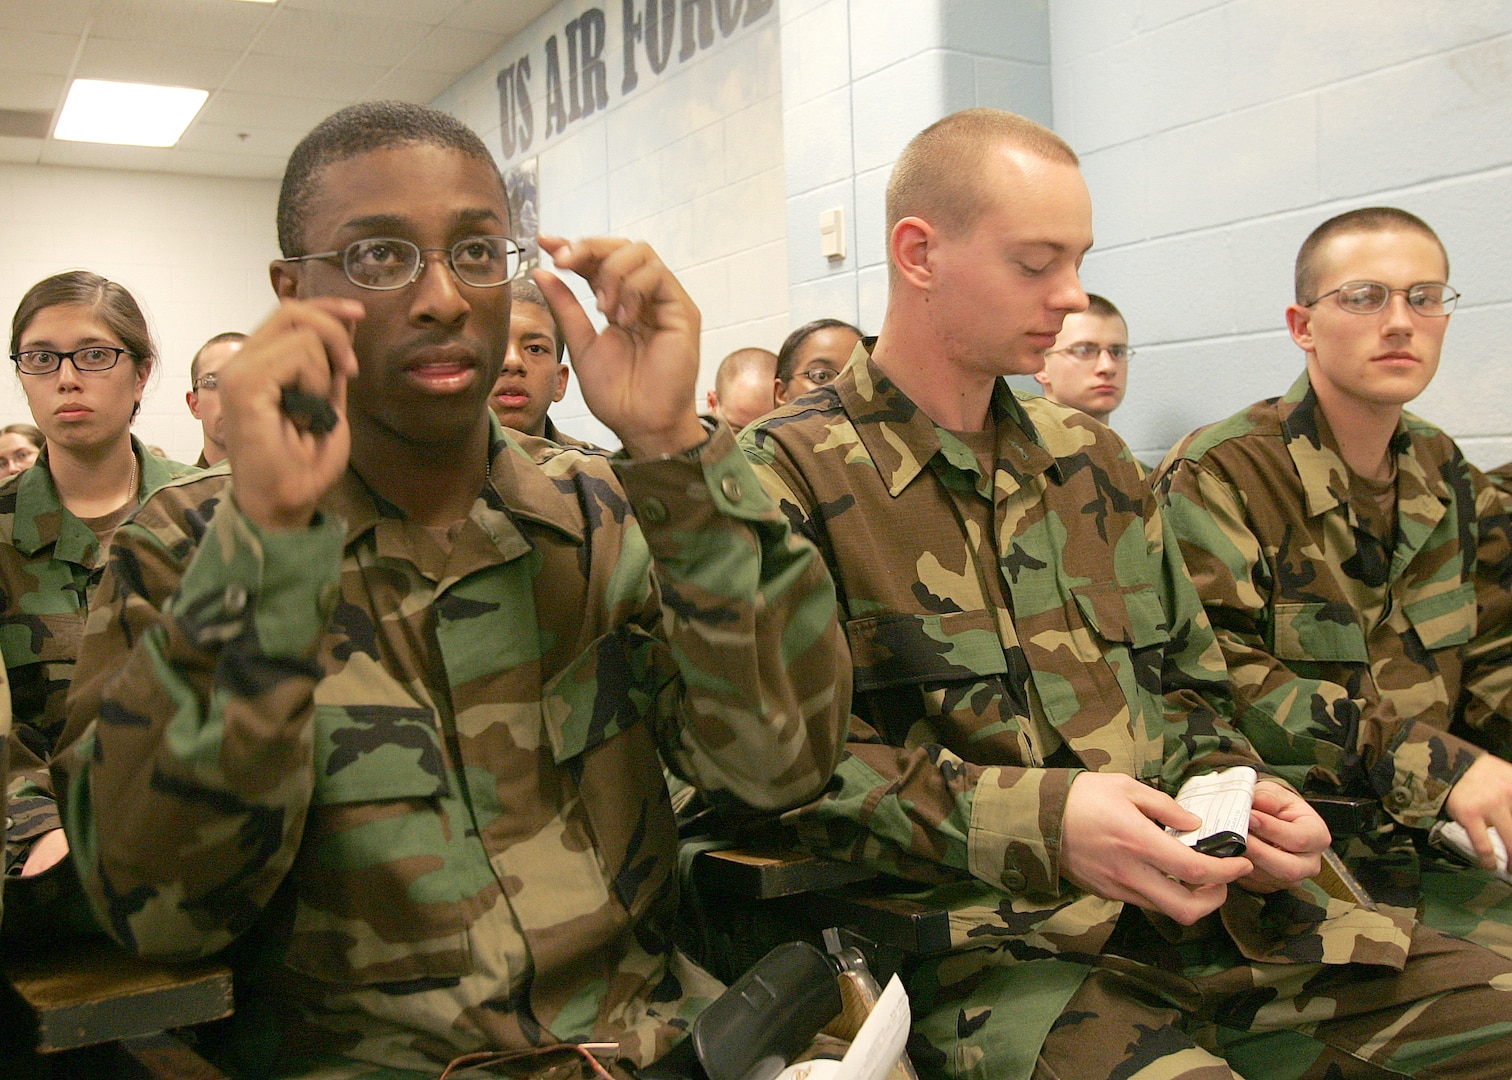 Trainee Cameron Cruz adjusts his black-rimmed frame-of-choice glasses, while Trainee Logan Schneider prepares to open the case of his newly received glasses Feb. 5, 2007, at the 331st Training Squadron. At right is Trainee Michael Falgout, also in Flight 189, 331st TRS, already wearing his black-rimmed FOC glasses. The frames-of-choice for trainees was an initiative of Brig. Gen. Darrell Jones, a former 37th Training Wing commander at Lackland Air Force Base, Texas. (USAF photo by Robbin Cresswell)